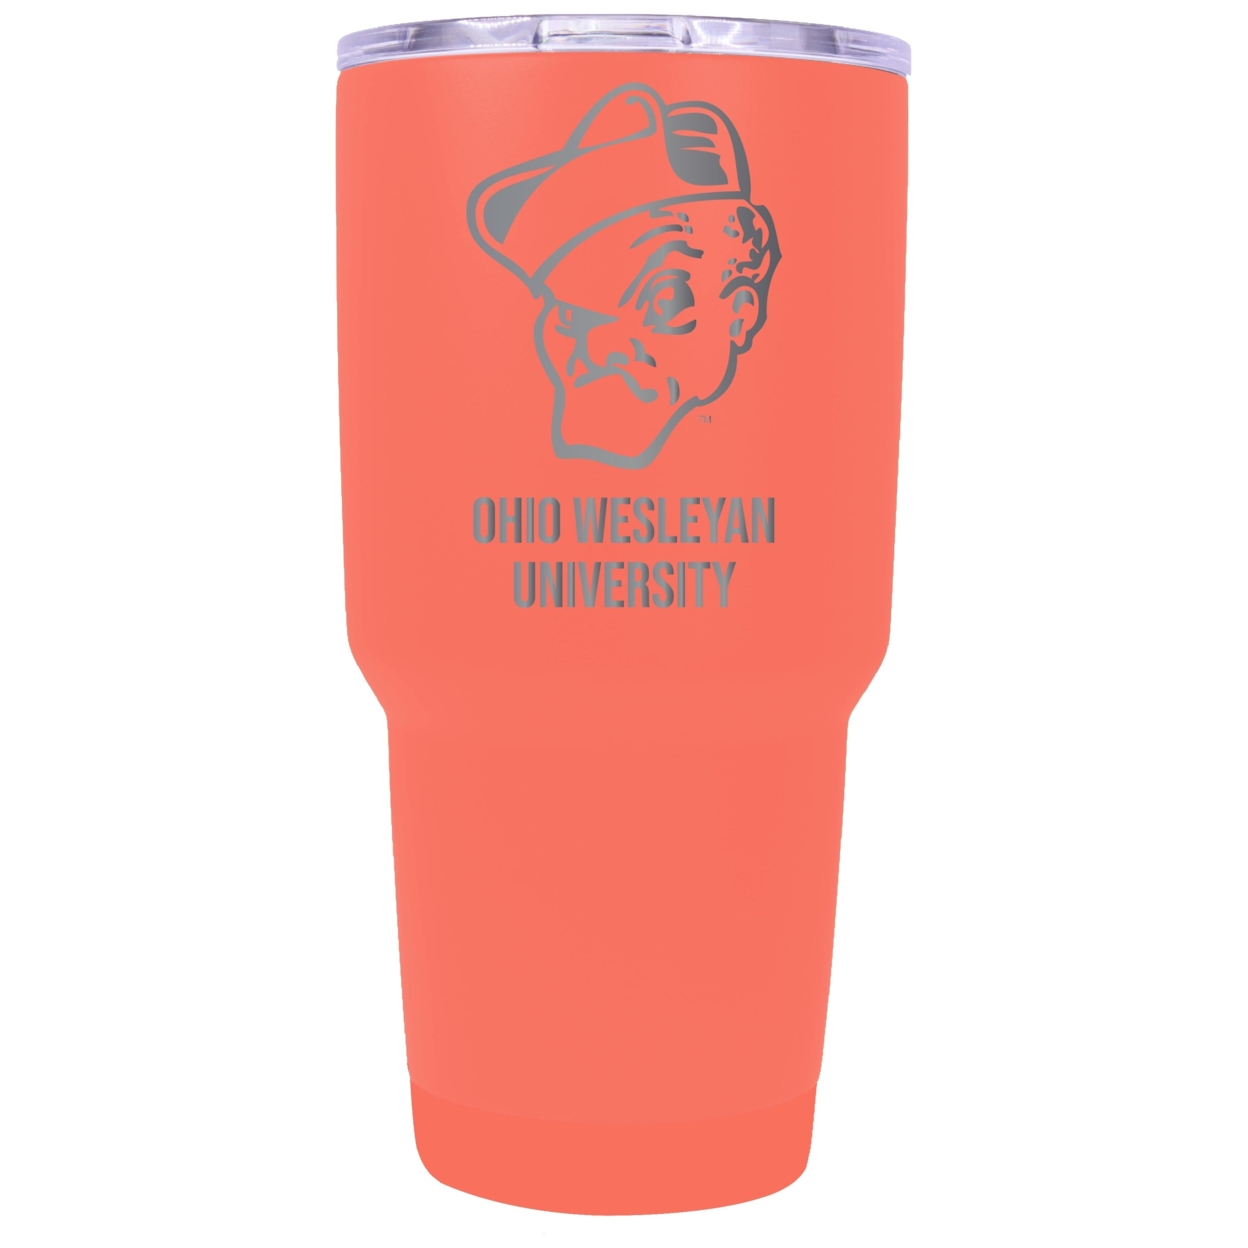 Ohio Wesleyan University 24 Oz Laser Engraved Stainless Steel Insulated Tumbler - Choose Your Color. - Coral